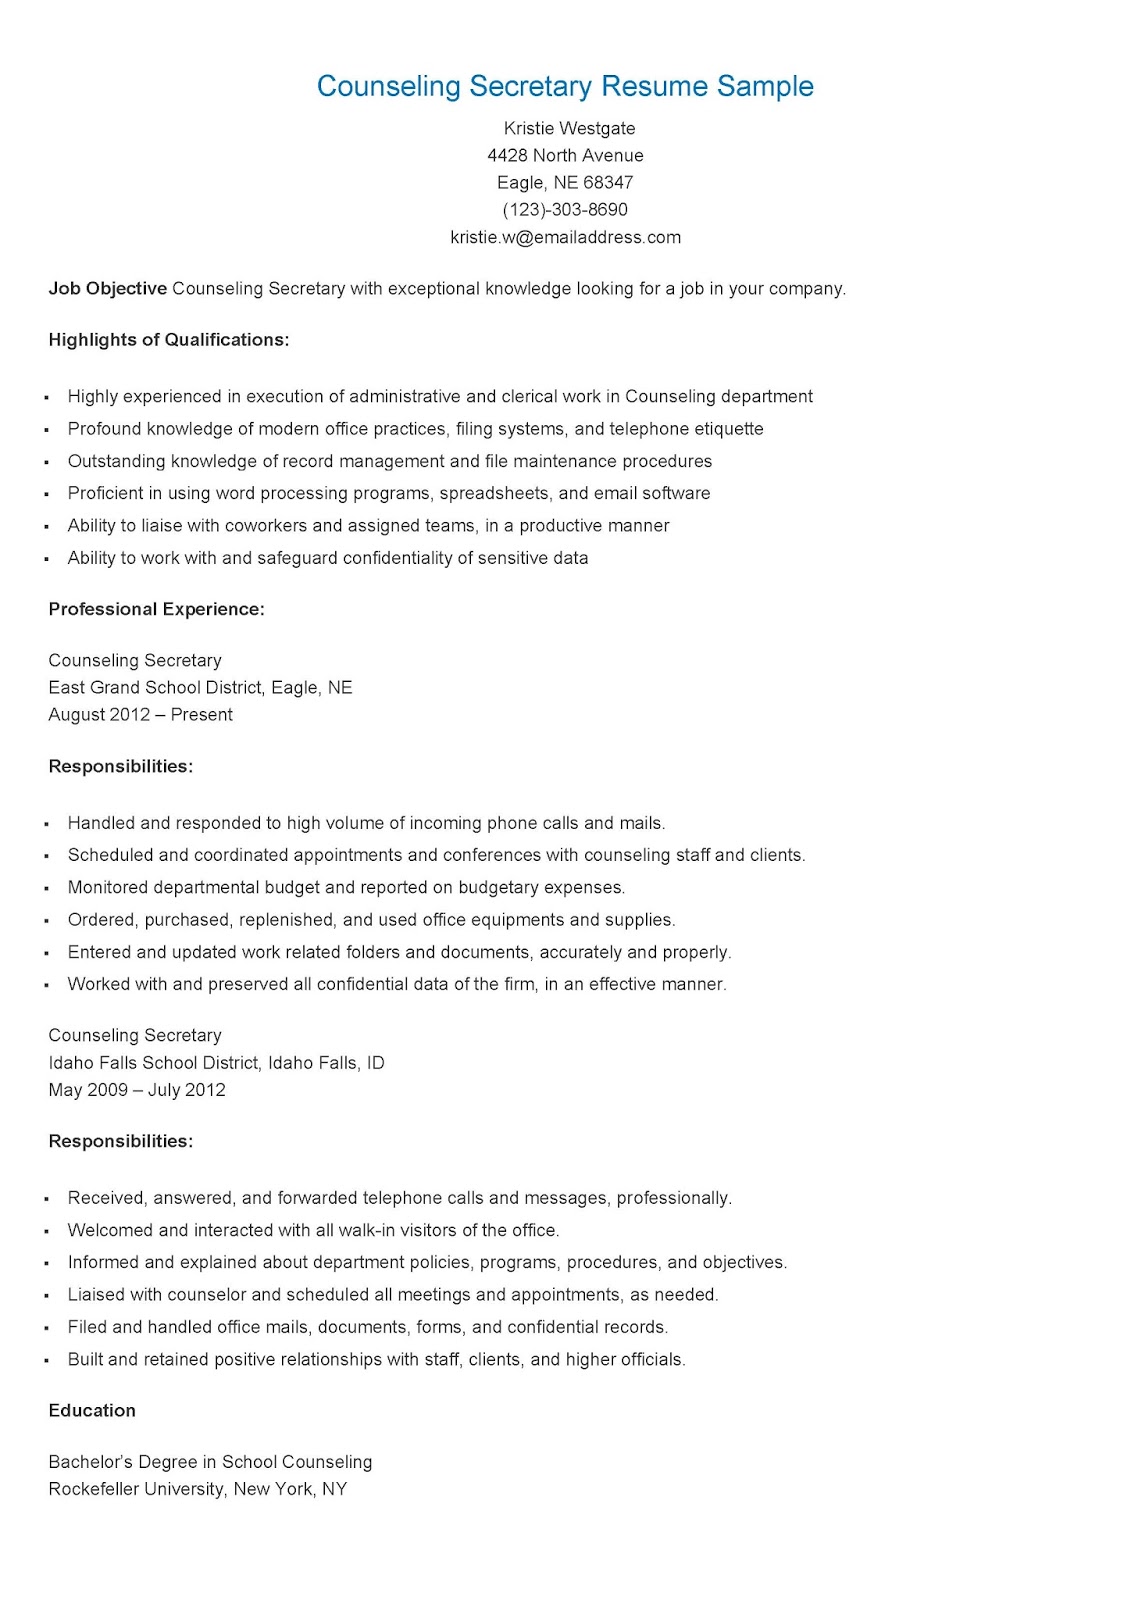 Physical therapist resume format